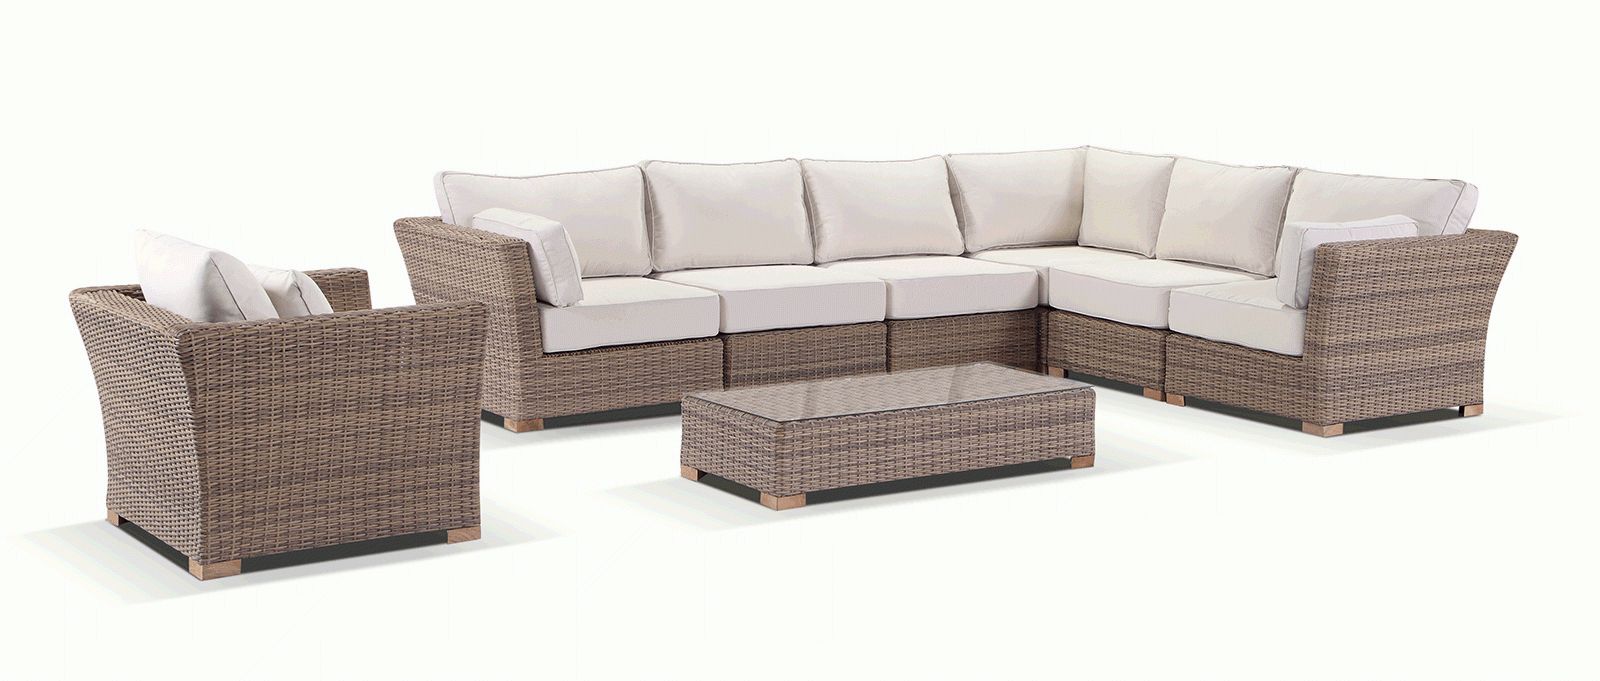 Wicker Outdoor Corner Modular Lounge Couch Sofa Couch Chair Furniture Throughout Well Liked Modular Outdoor Arm Chairs (View 4 of 15)